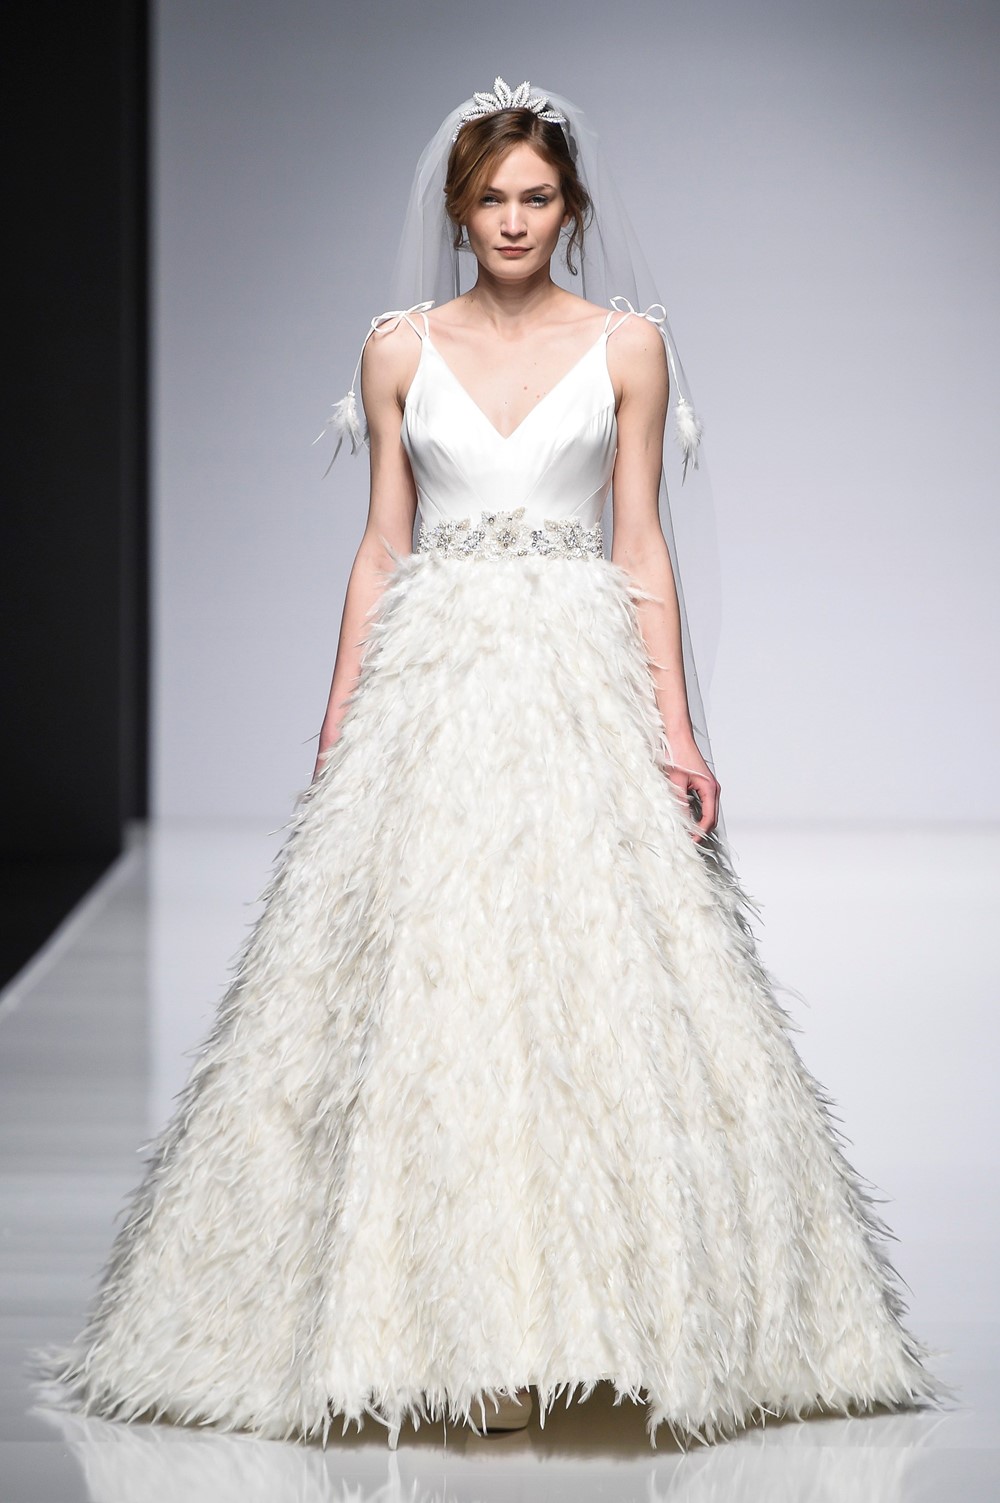 Top Bridal Trends for 2019 - Feathers Sassi Holford Odette